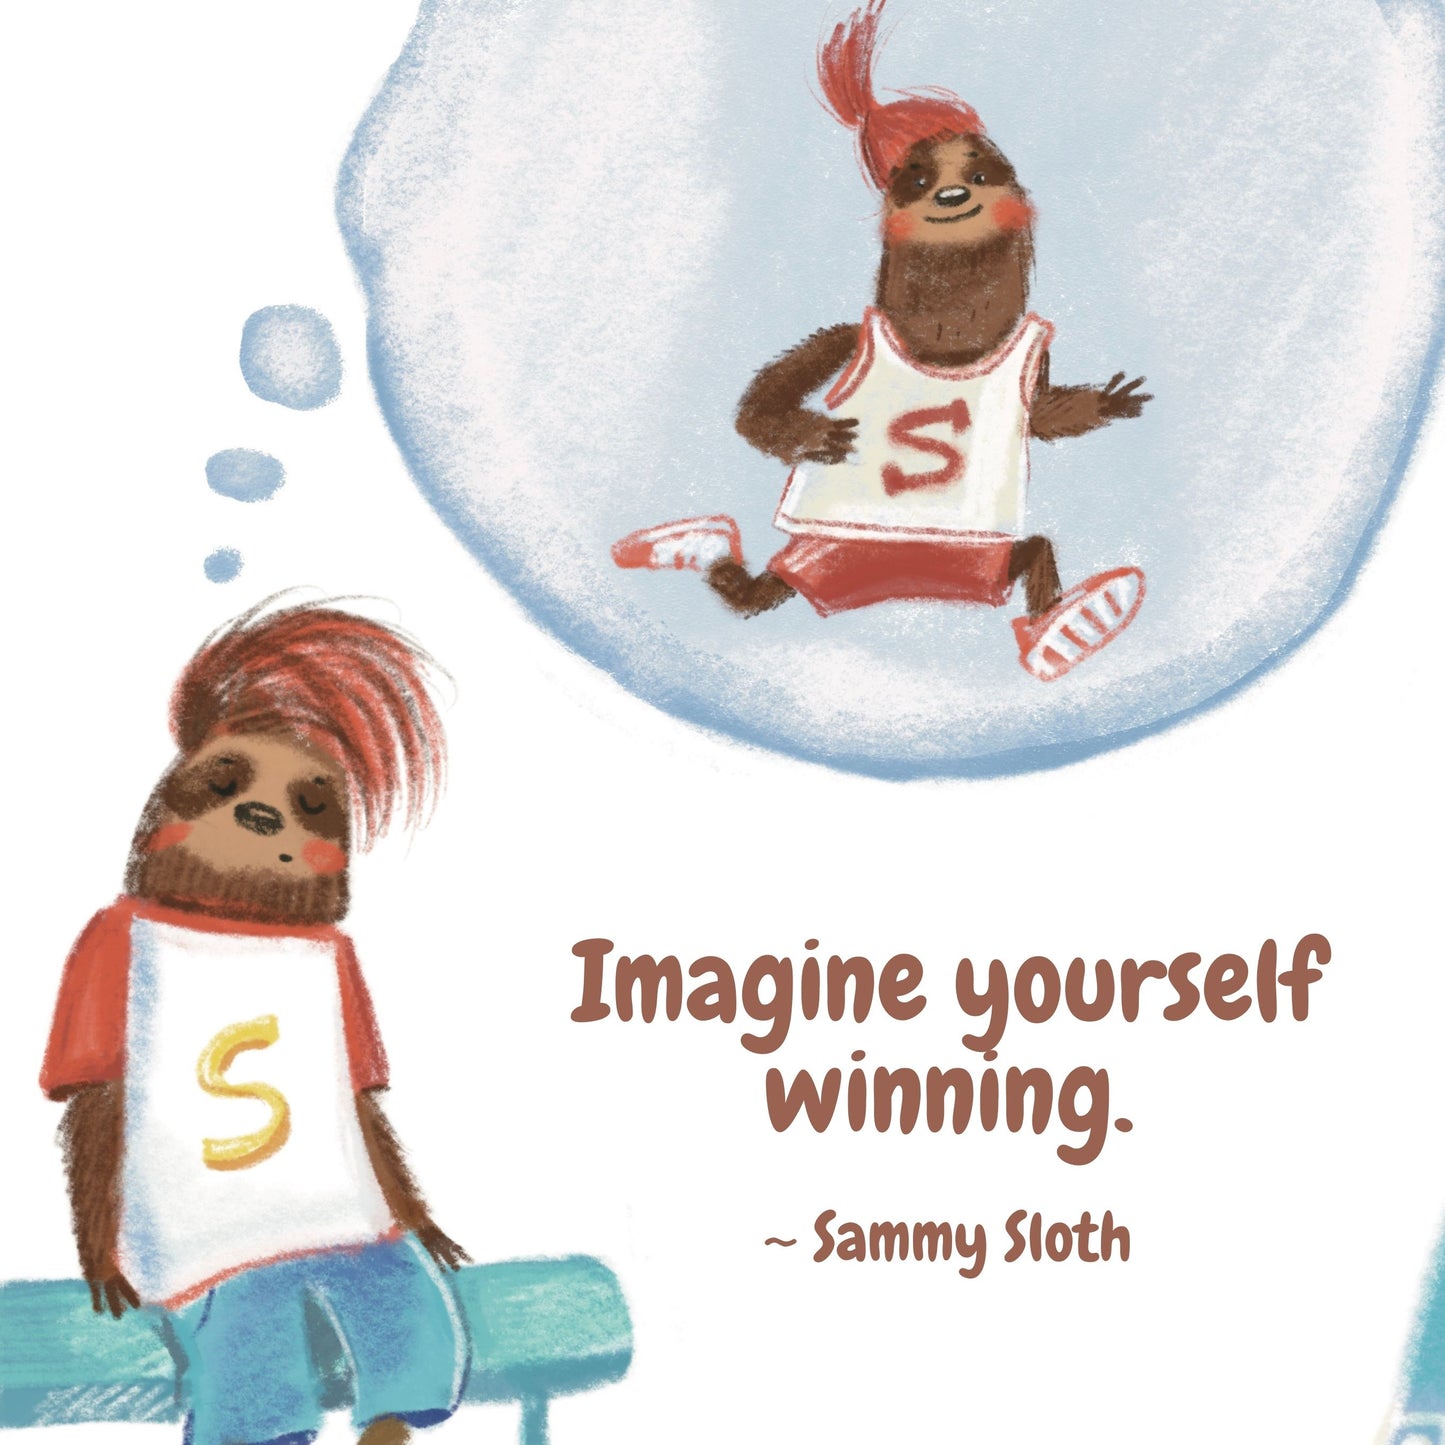 Sammy Sloth's Unhelpful Thoughts Picture Book with Posters